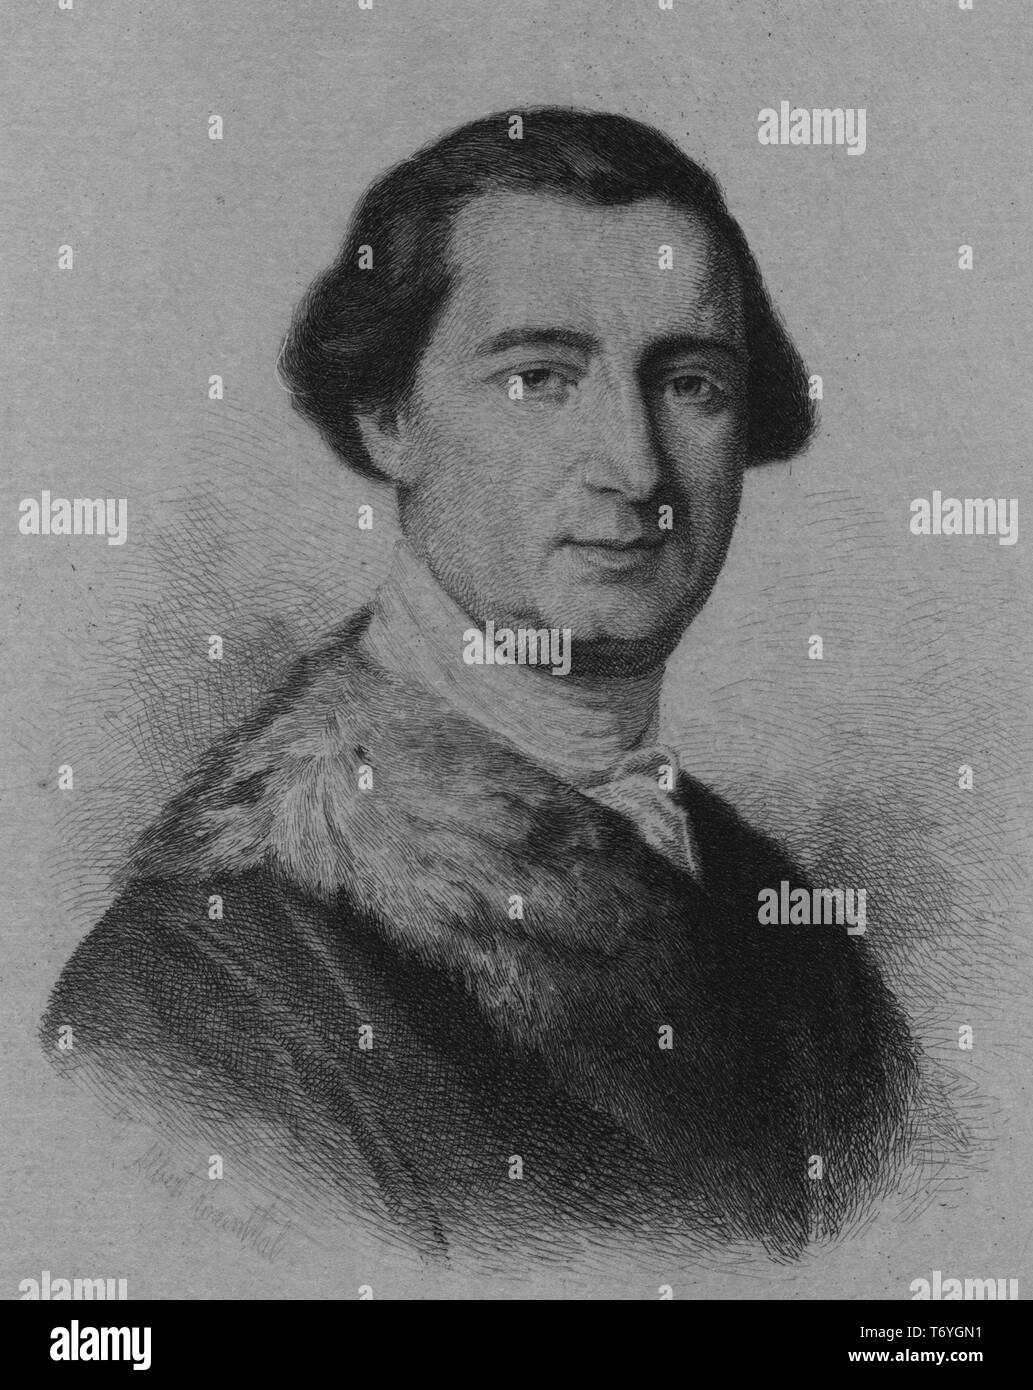 Engraved portrait of John Penn, the last governor of colonial Pennsylvania, a British politician from London, England, 1900. From the New York Public Library. () Stock Photo